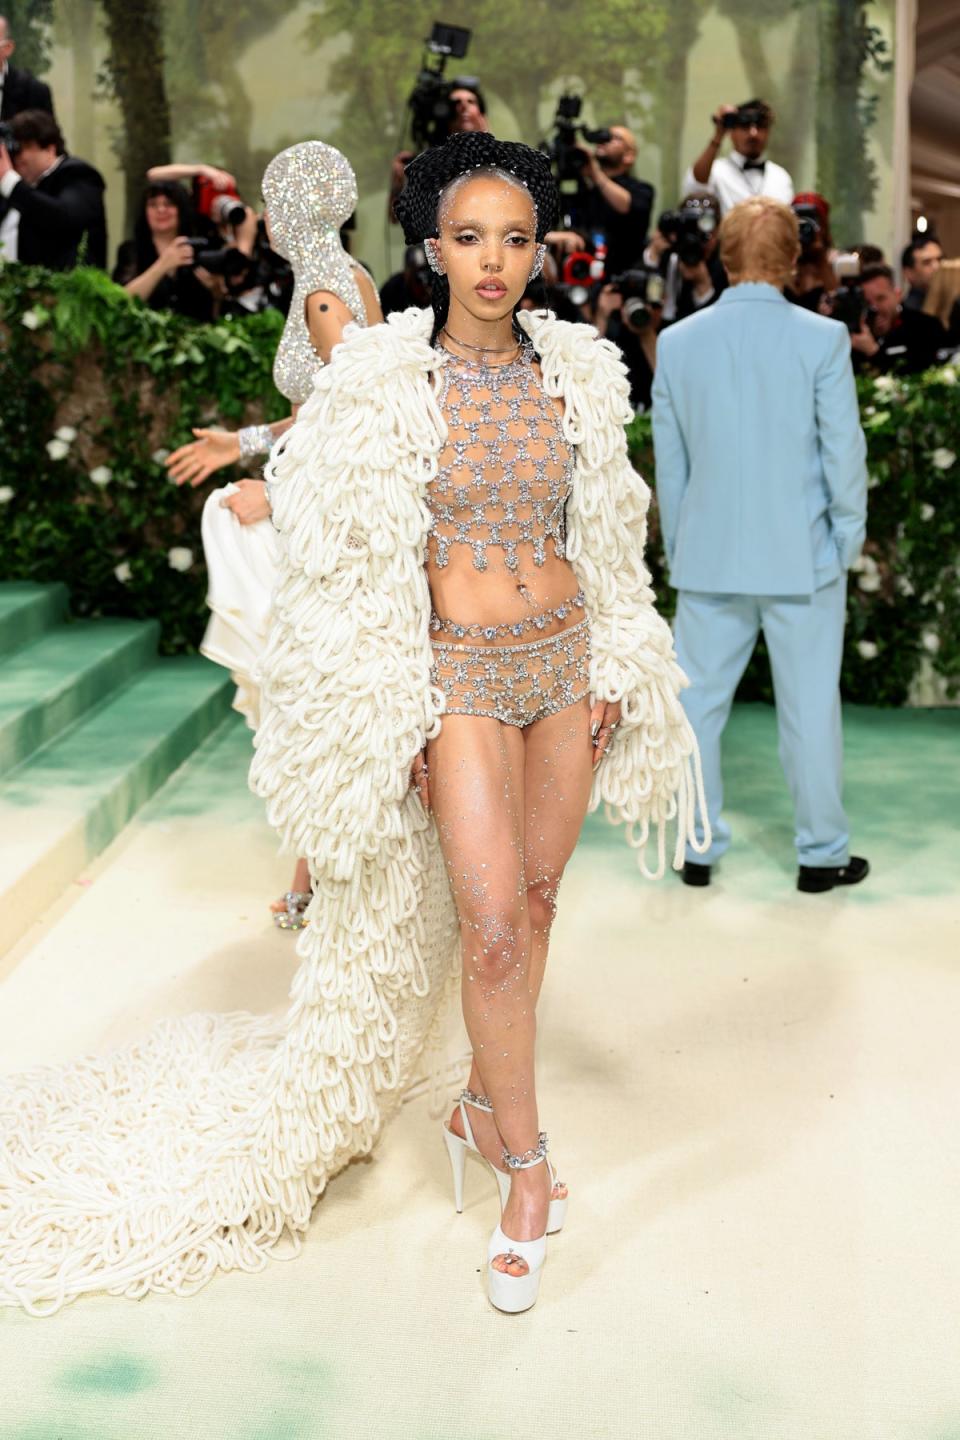 FKA Twigs in Stella McCartney (Getty Images for The Met Museum)